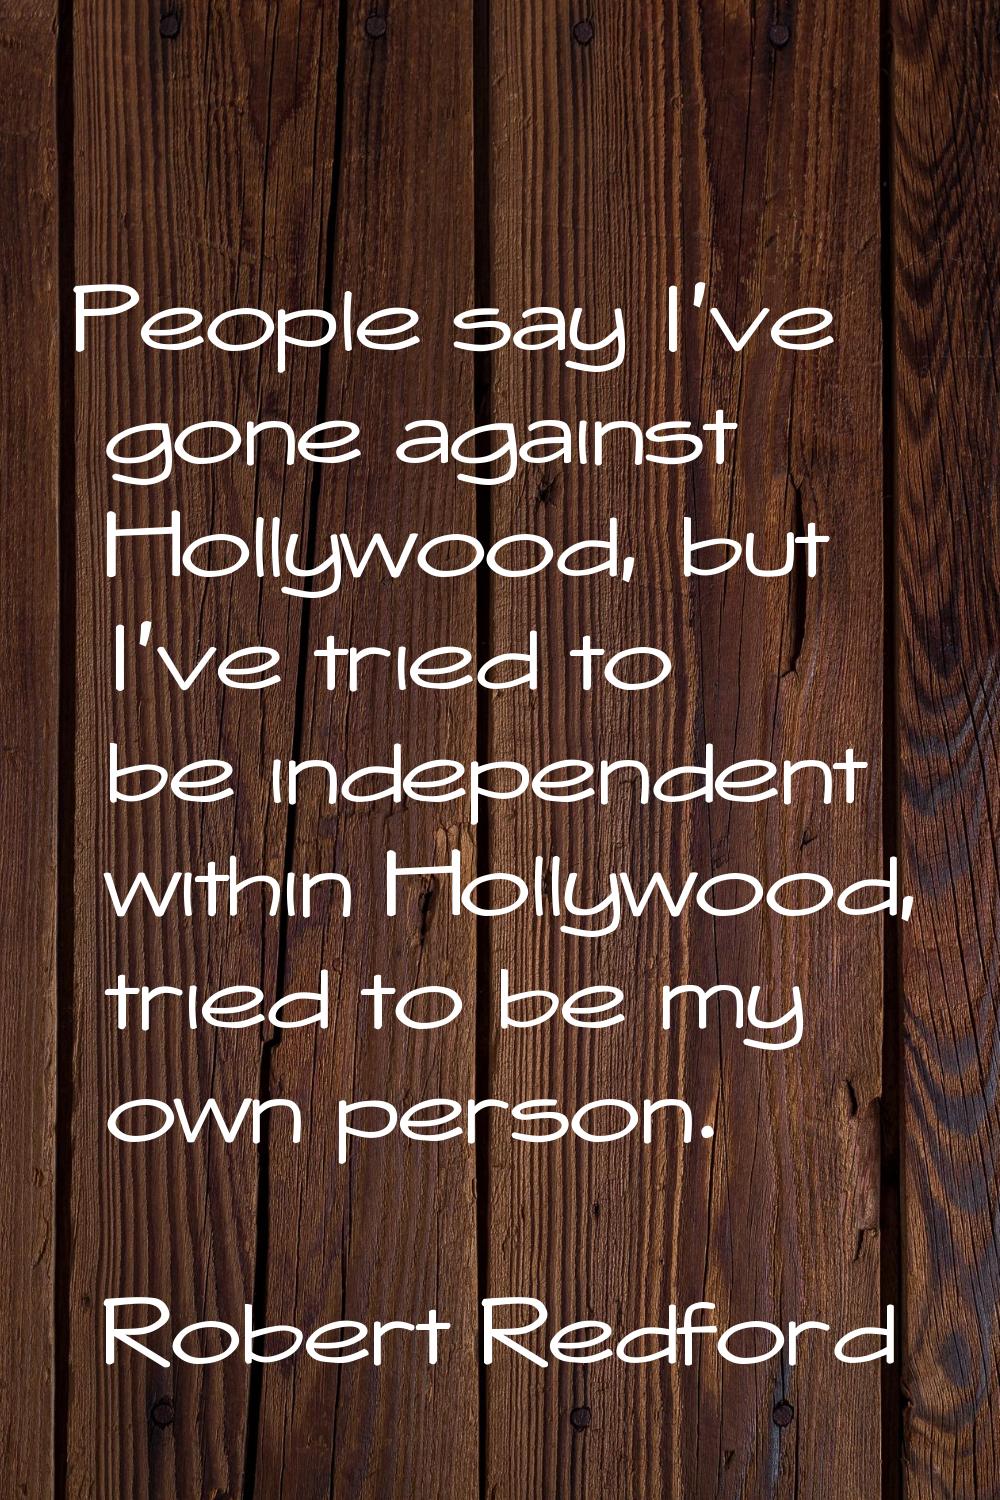 People say I've gone against Hollywood, but I've tried to be independent within Hollywood, tried to